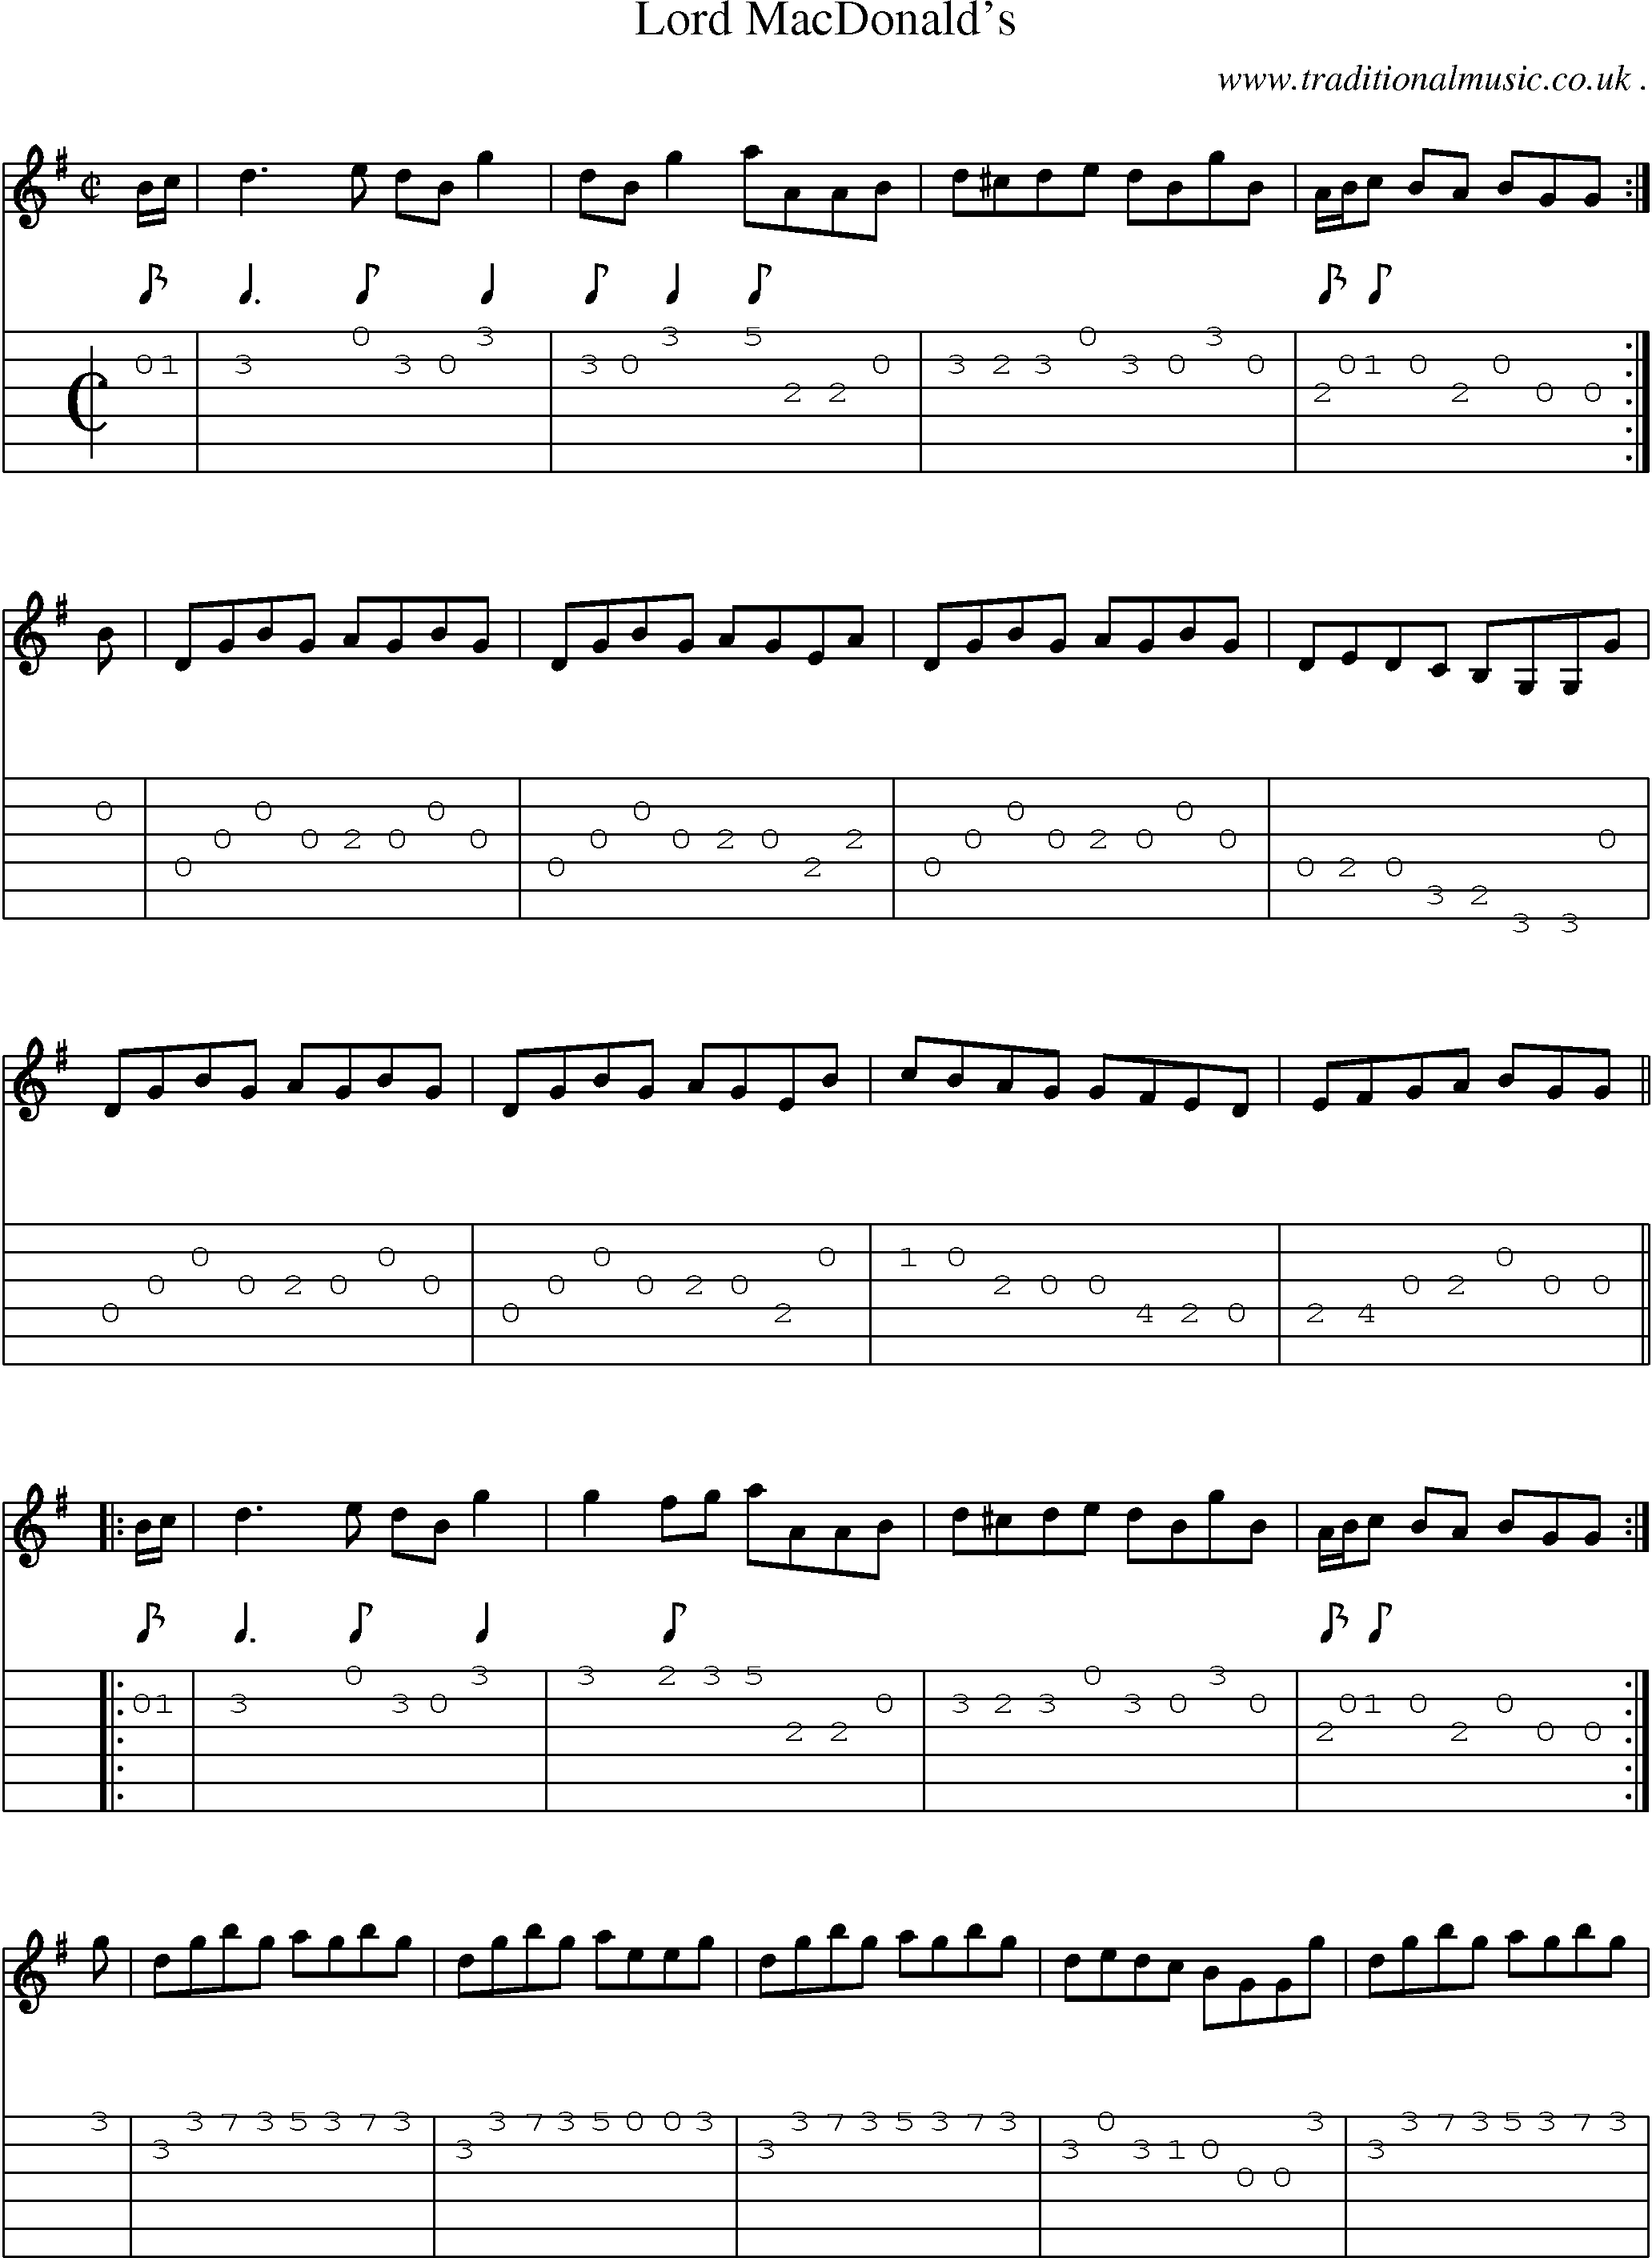 Sheet-music  score, Chords and Guitar Tabs for Lord Macdonalds